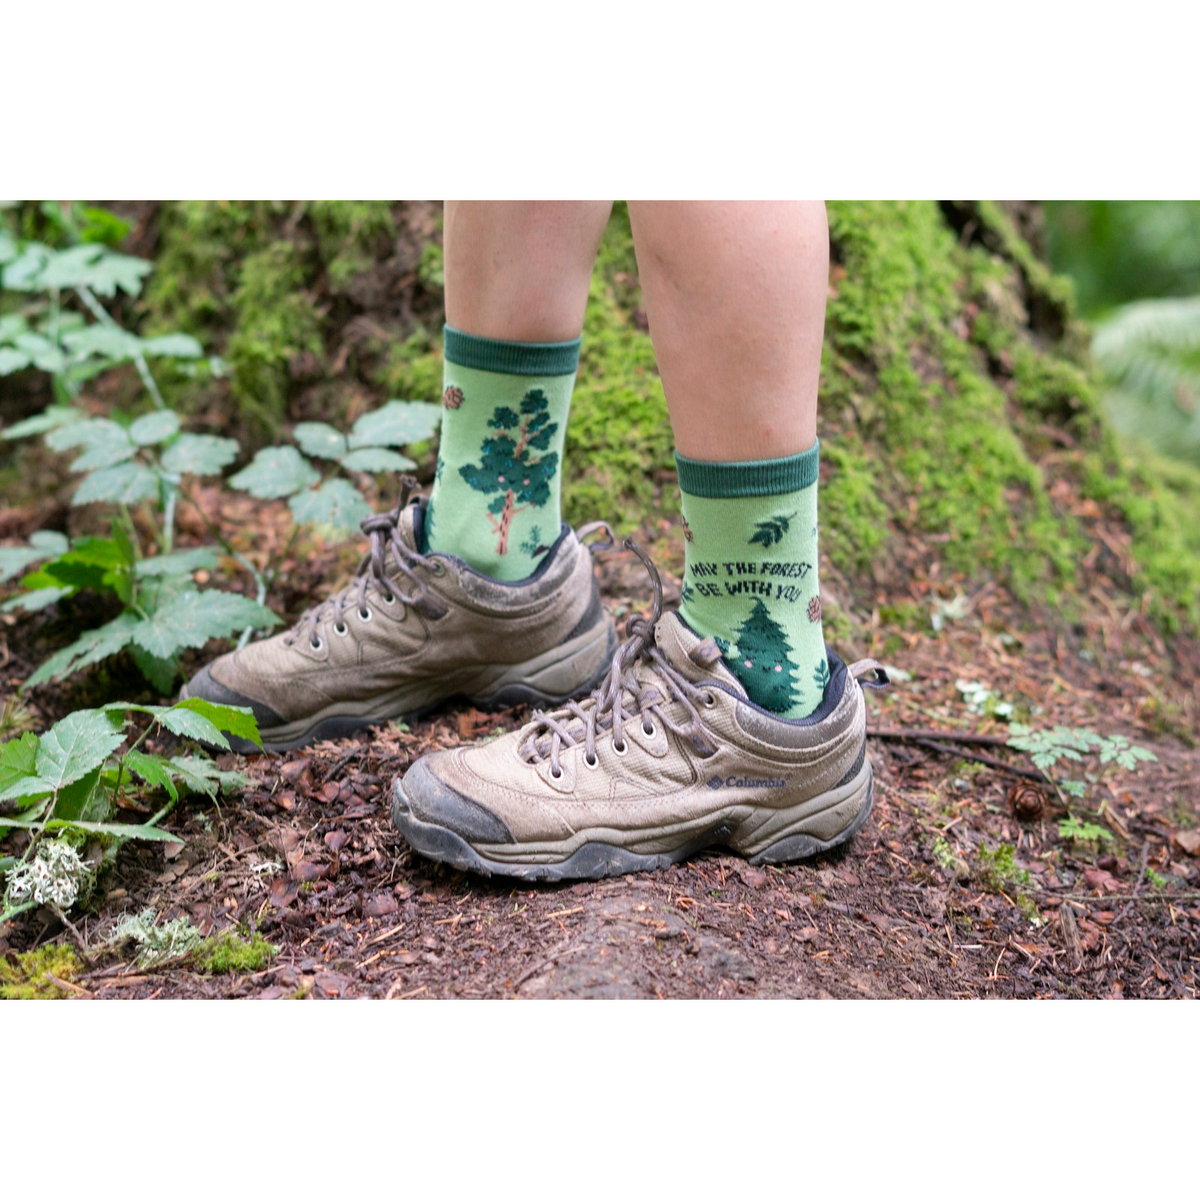 Sock It To Me May the Forest Be With You women&#39;s crew sock featuring a green sock with trees and pinecones and &quot;May the forest be with you&quot; written. Socks worn by a model outdoors. 